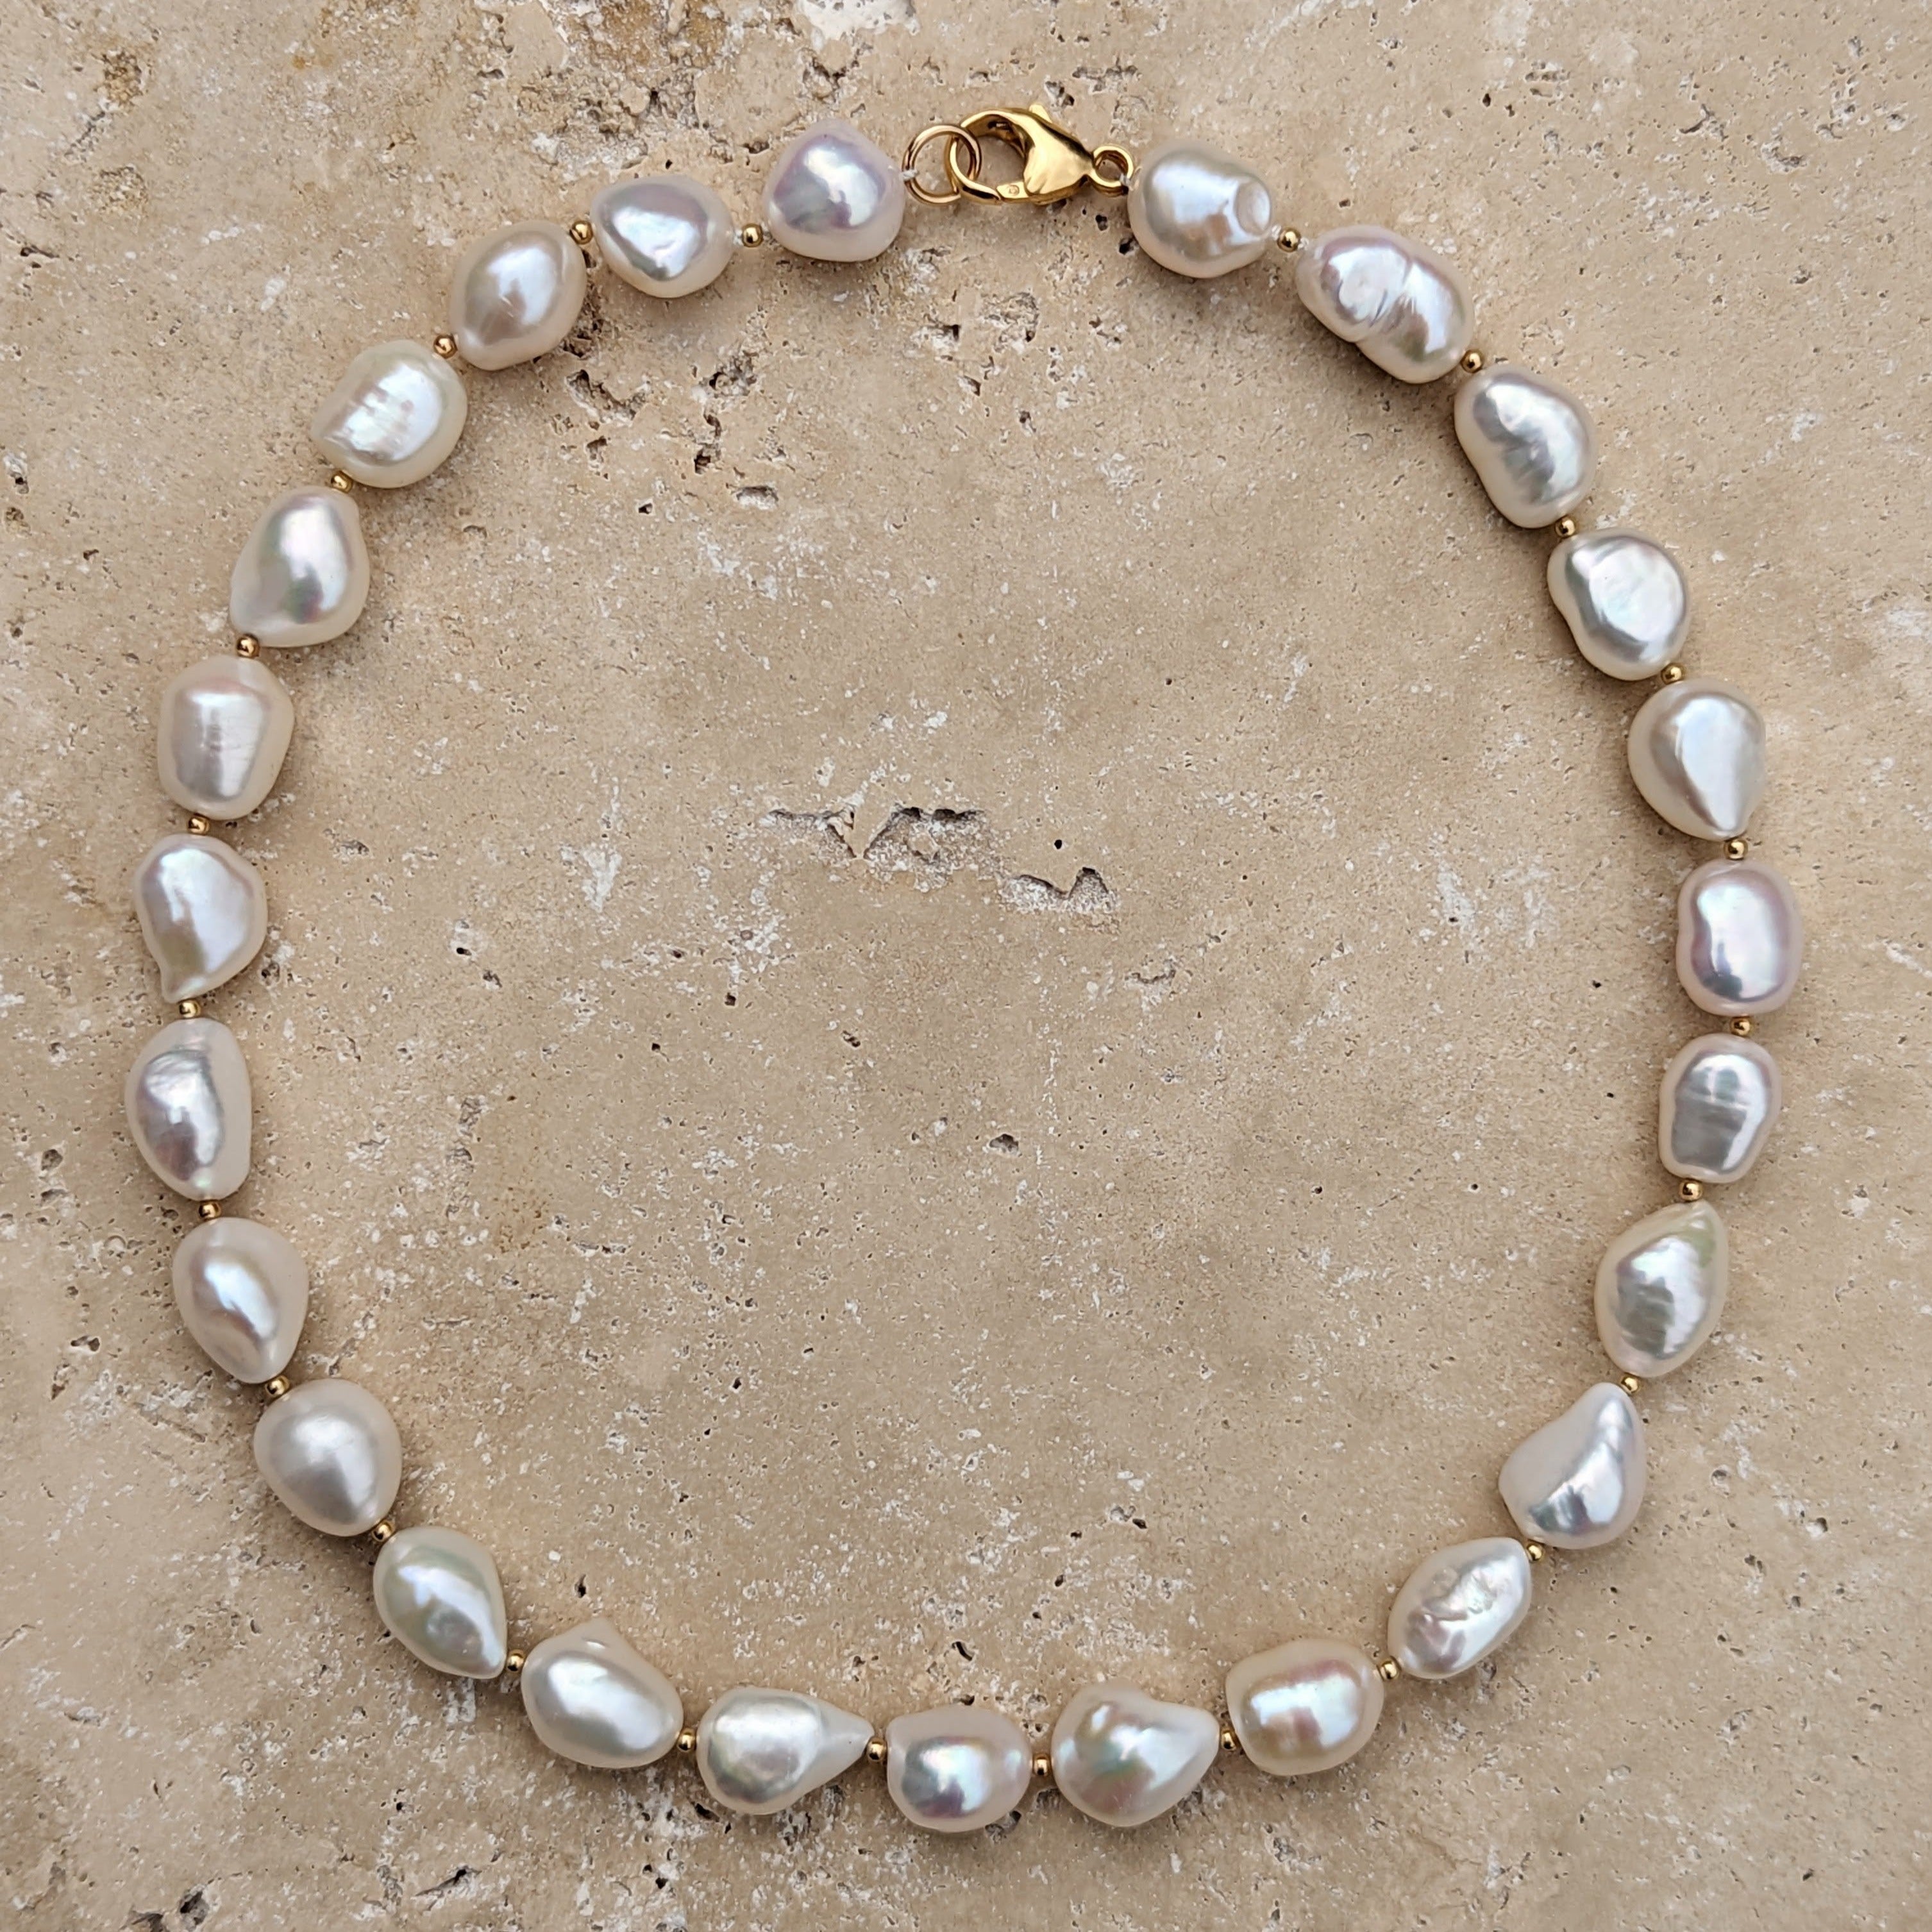 Chunky pearl necklace with small gold beads and clasp